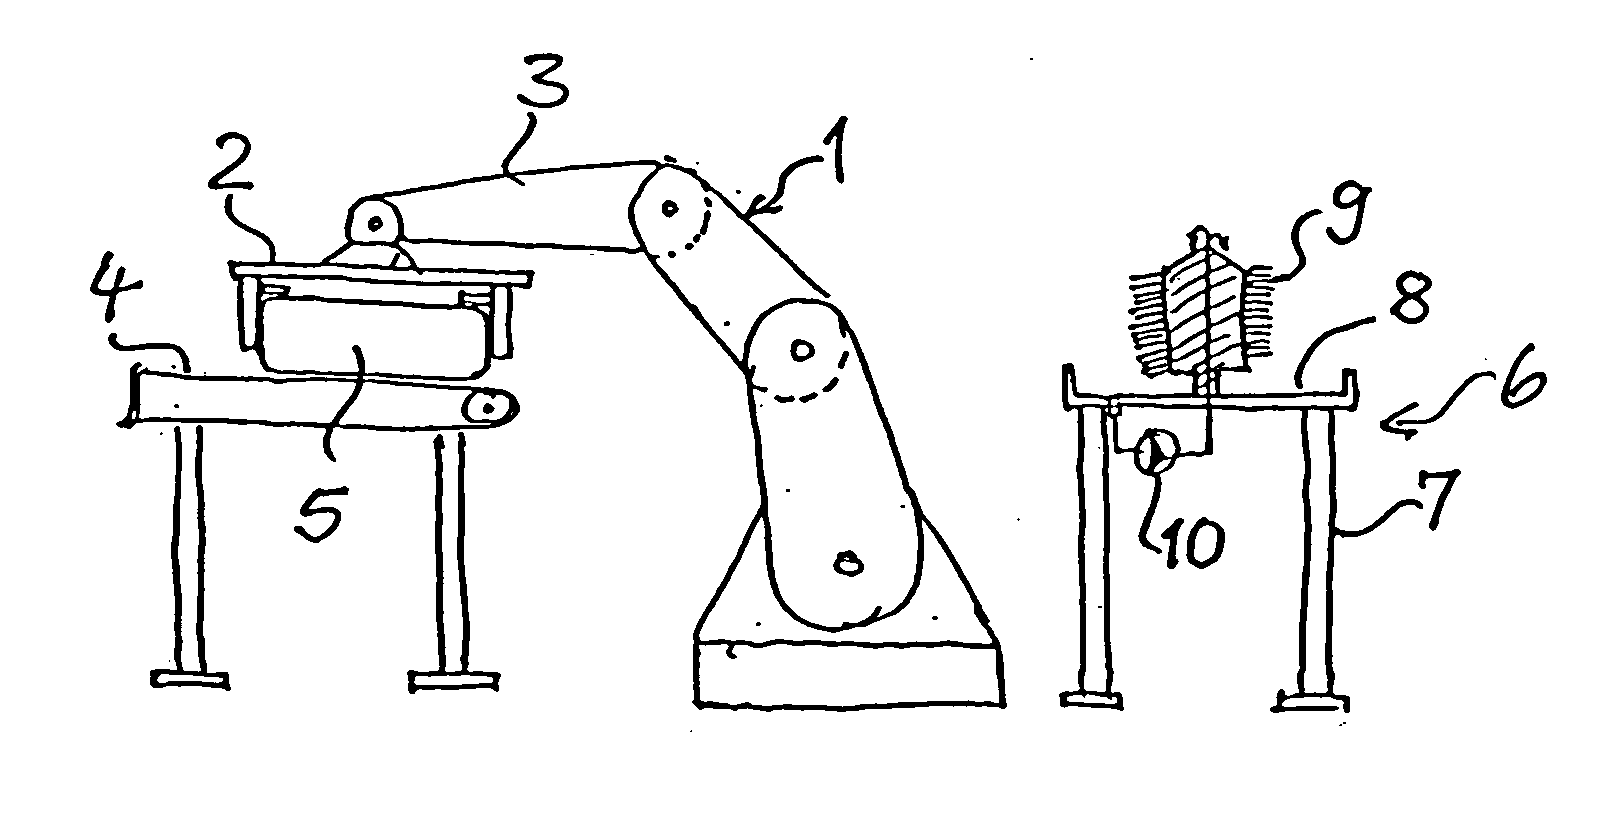 Method and apparatus for mounting a pneumatic tire